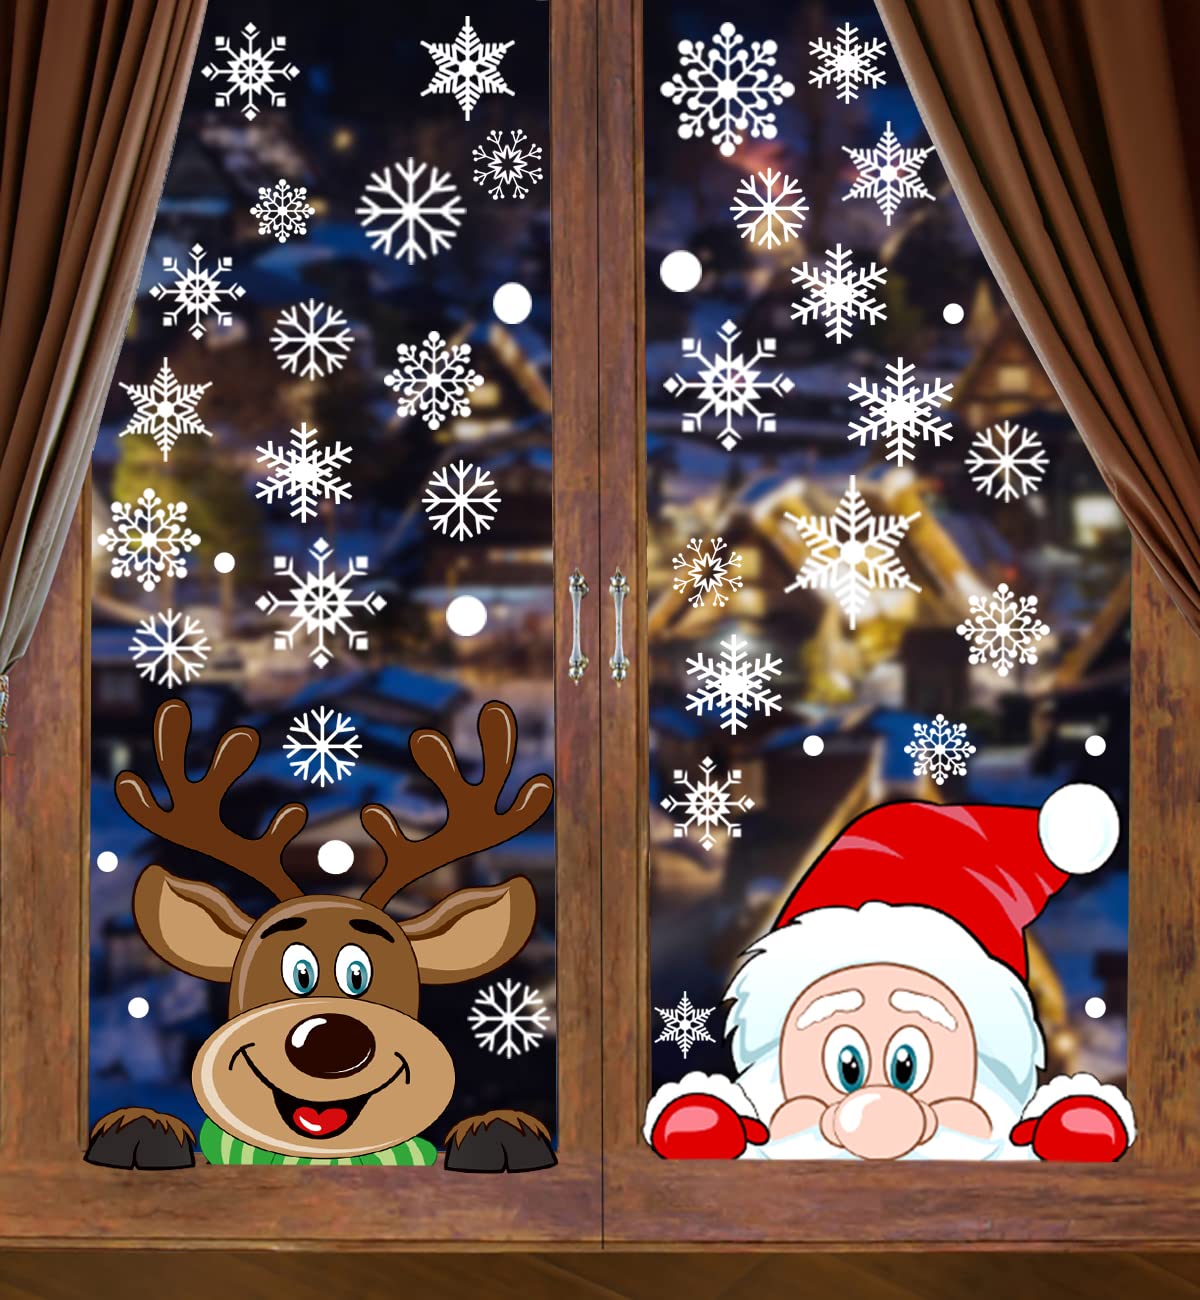 Veylin 6 Sheets 300 Pcs Christmas Window Clings, Snowflake Reindeer Santa Claus Window Stickers For Christmas Window Descoration